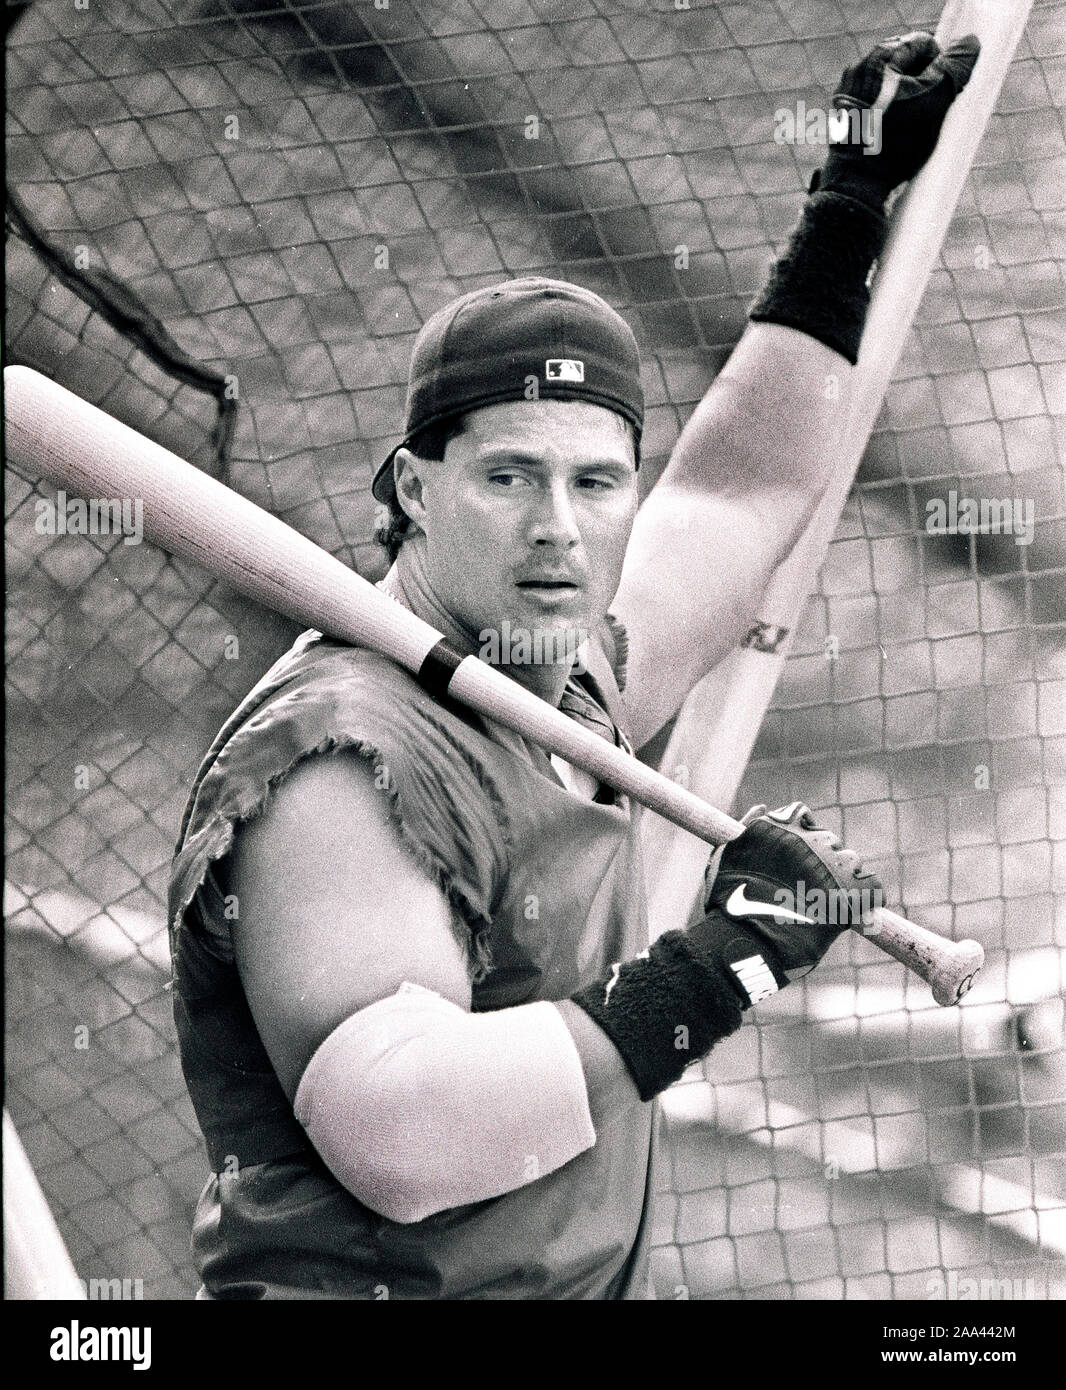 Boston Red Sox slugger Jose Canseco pauses during batting practice at Fenway Park in Boston Ma USA 1990’s photo by Bill Belknap Stock Photo